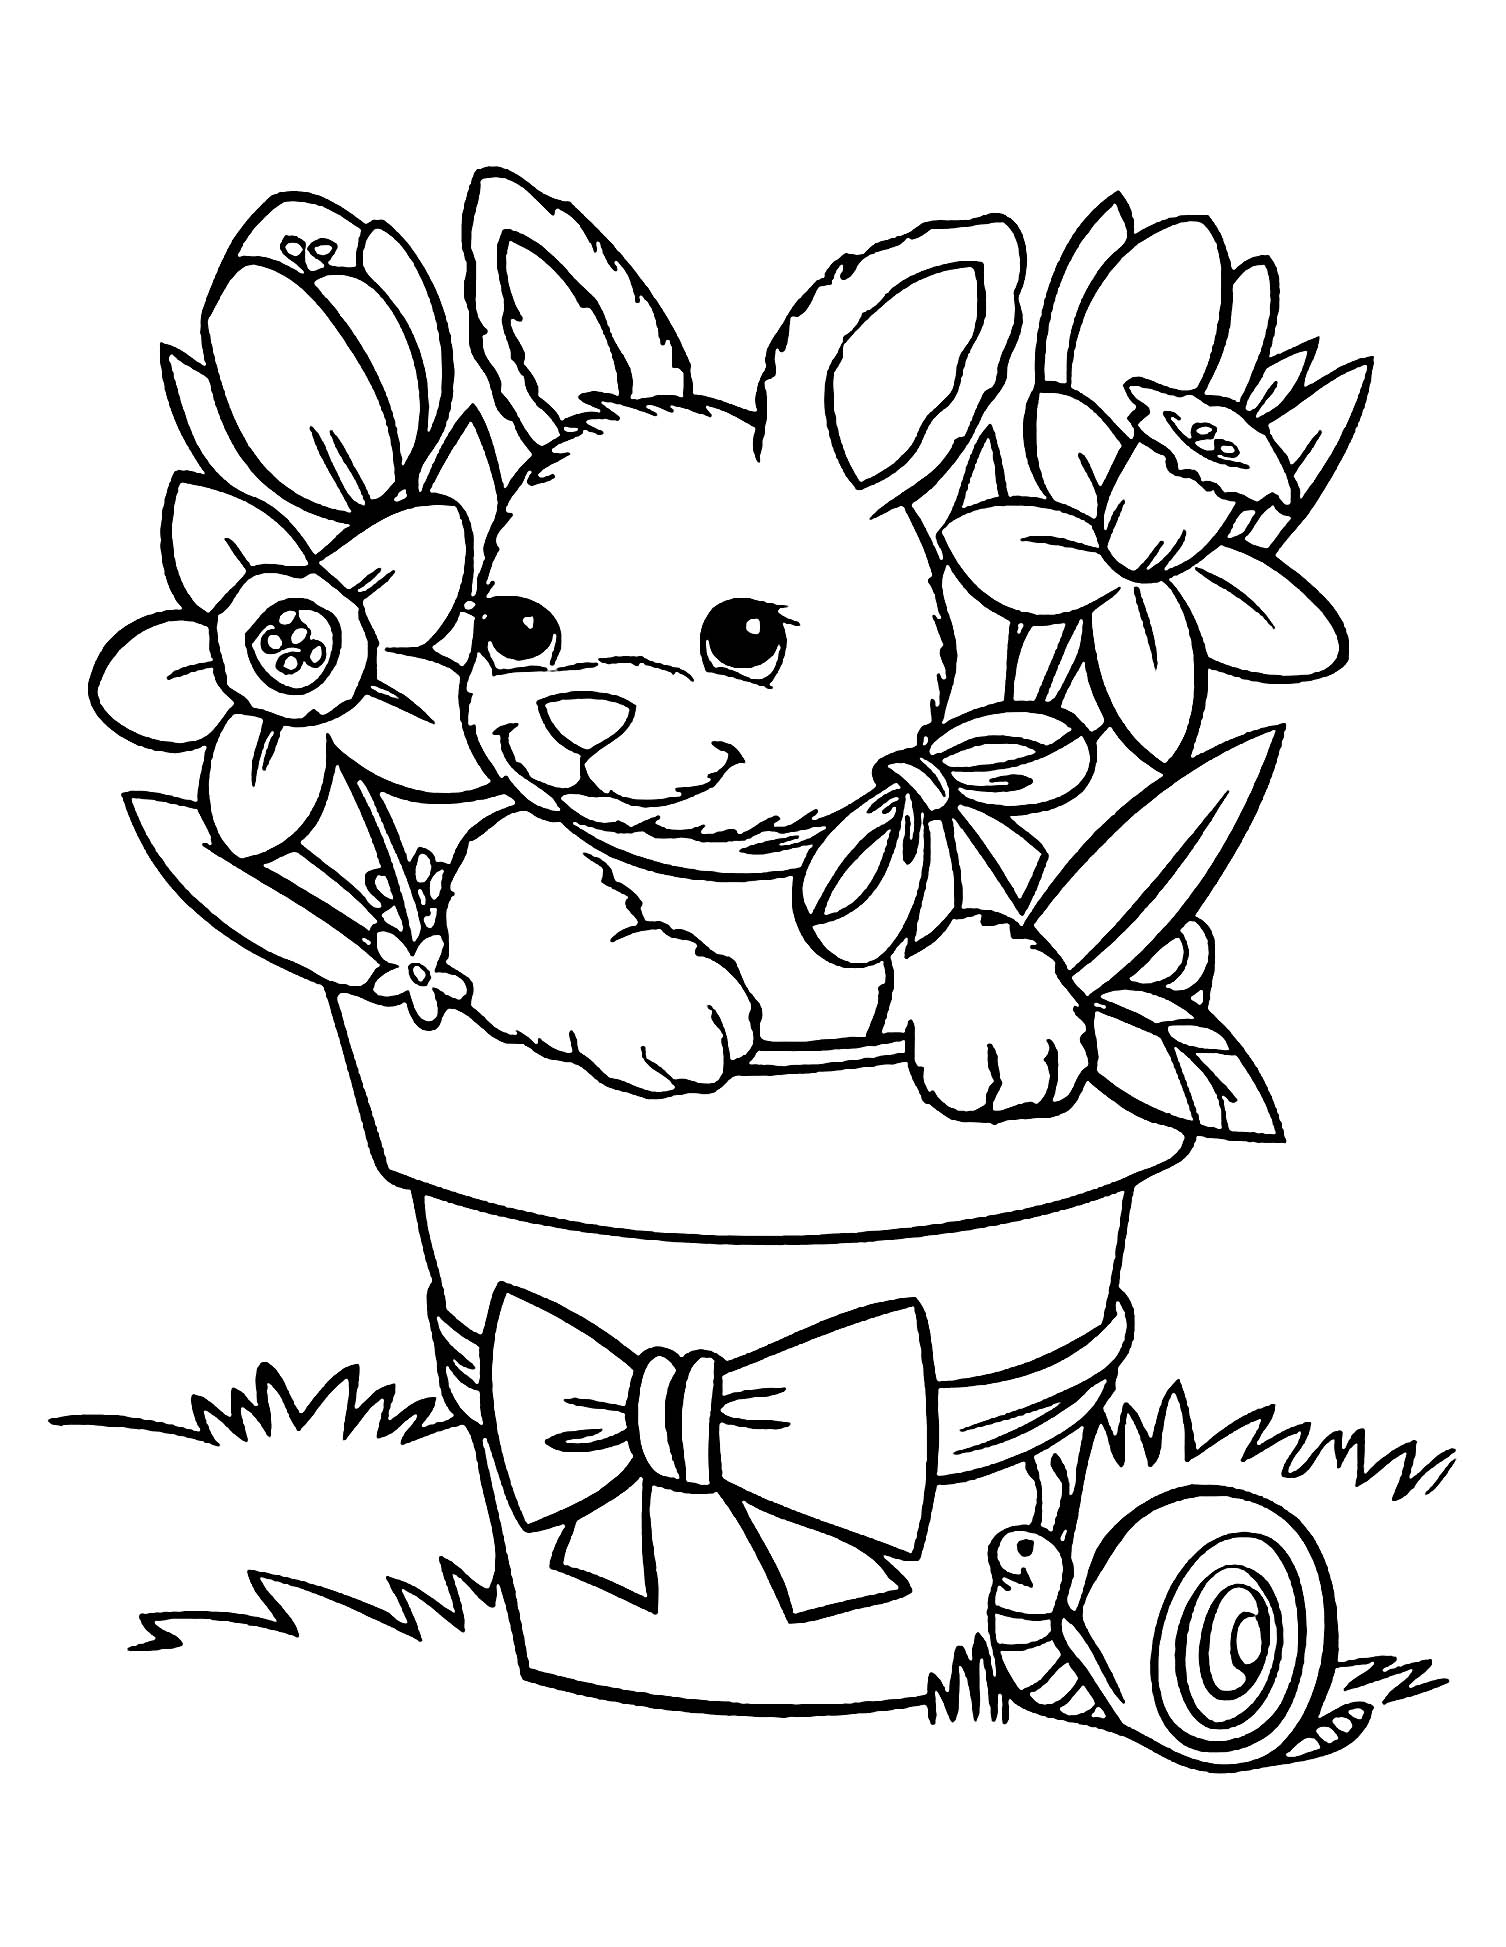 Printable Bunny Colouring Pages Cute Baby Bunnies Coloring Pages | My ...